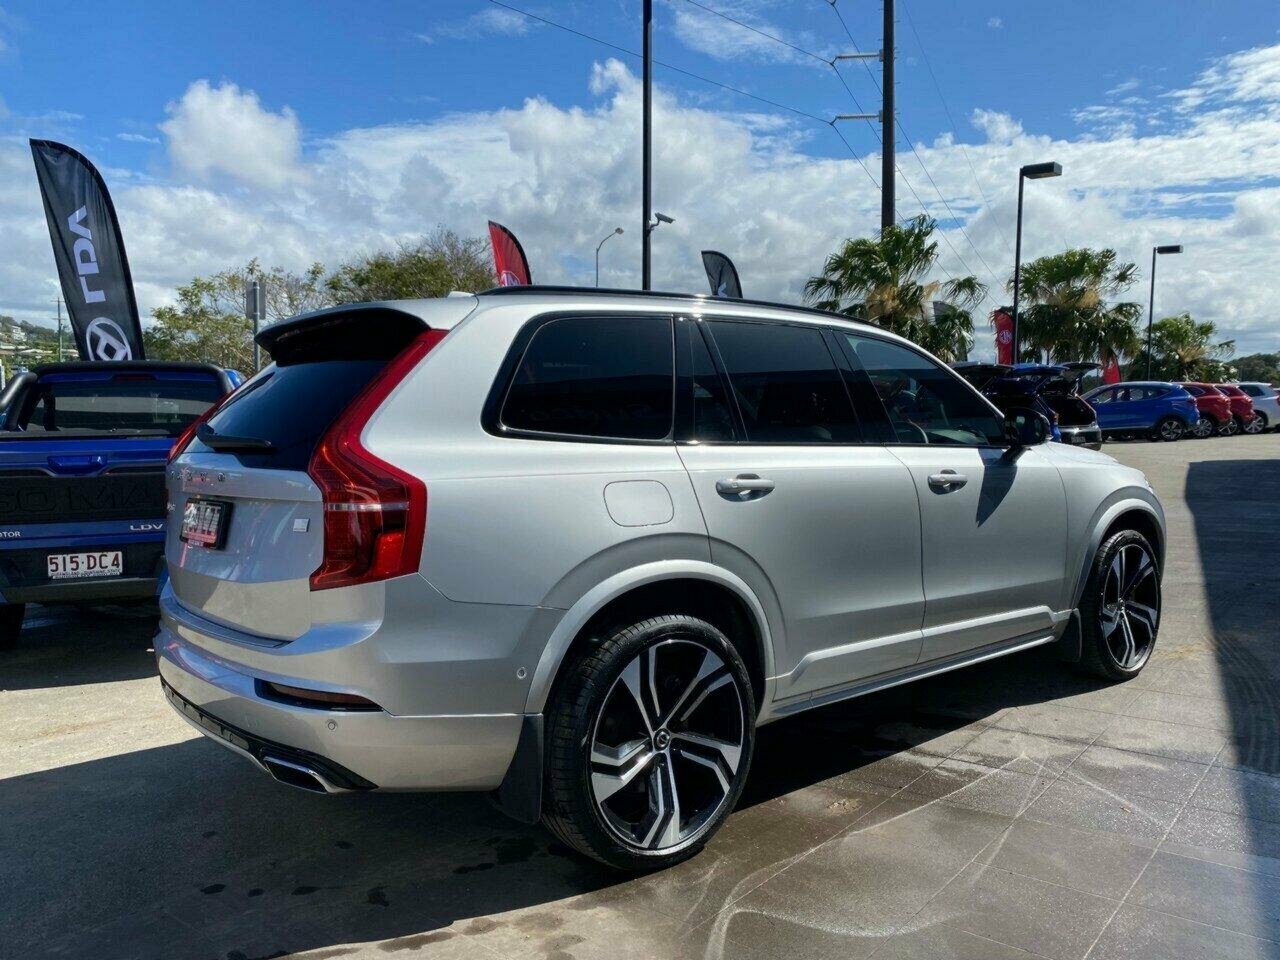 2021 Volvo XC90 L Series MY21 Recharge Geartronic AWD Plug-In Hybrid Wagon Image 6